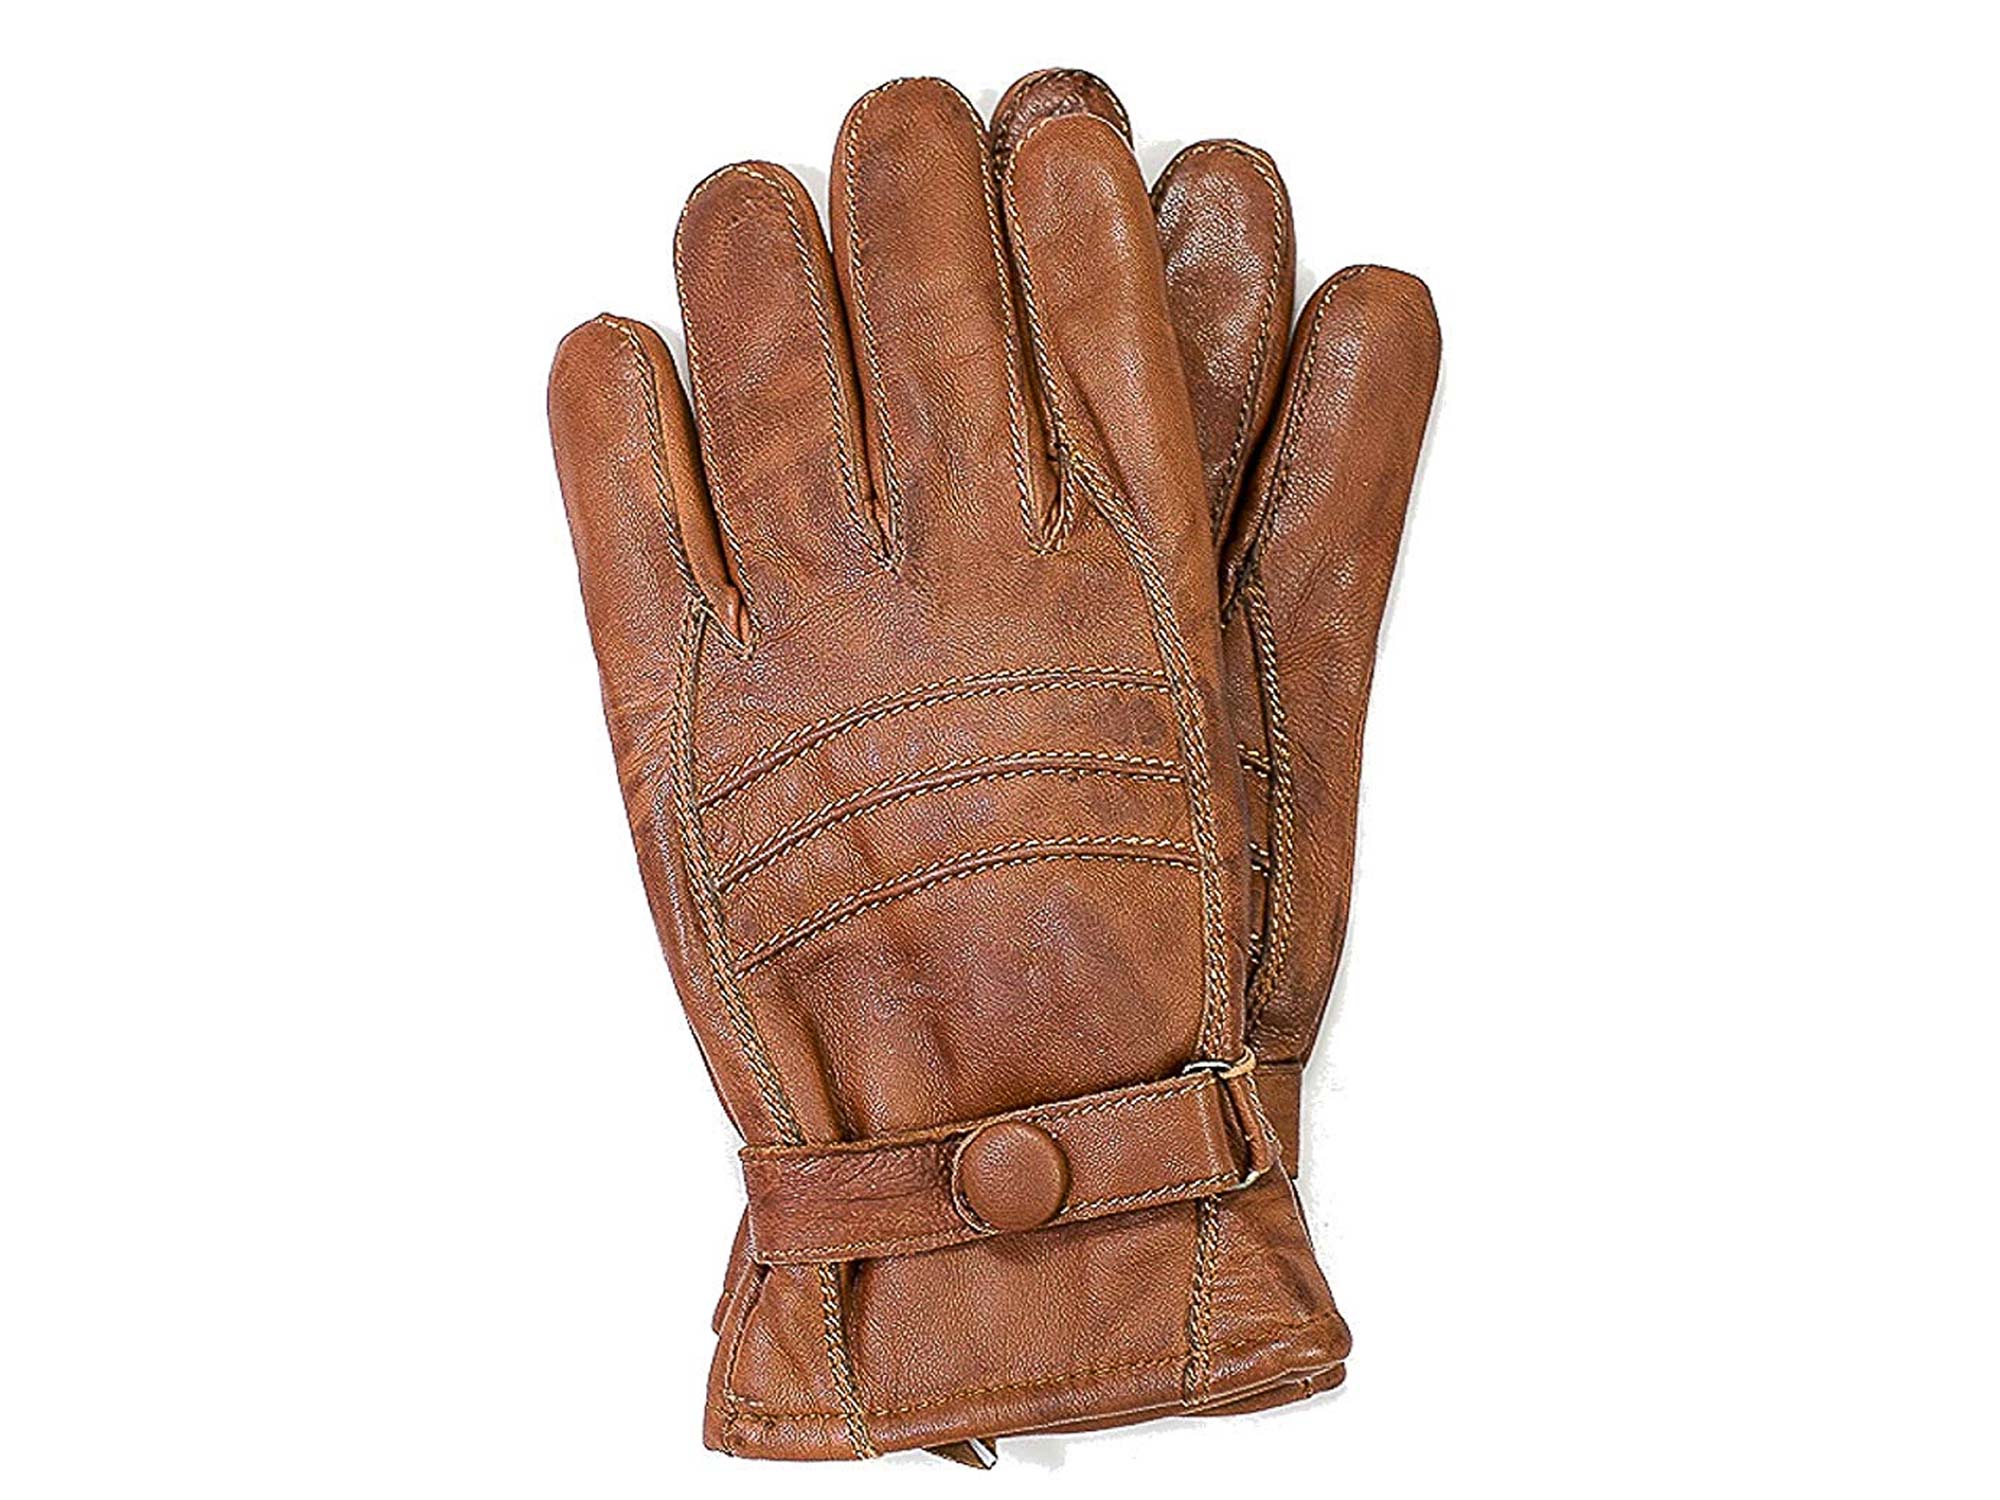 Woof Wear PRECISION THERMAL GLOVE Black or Brown Riding Gloves for colder days 